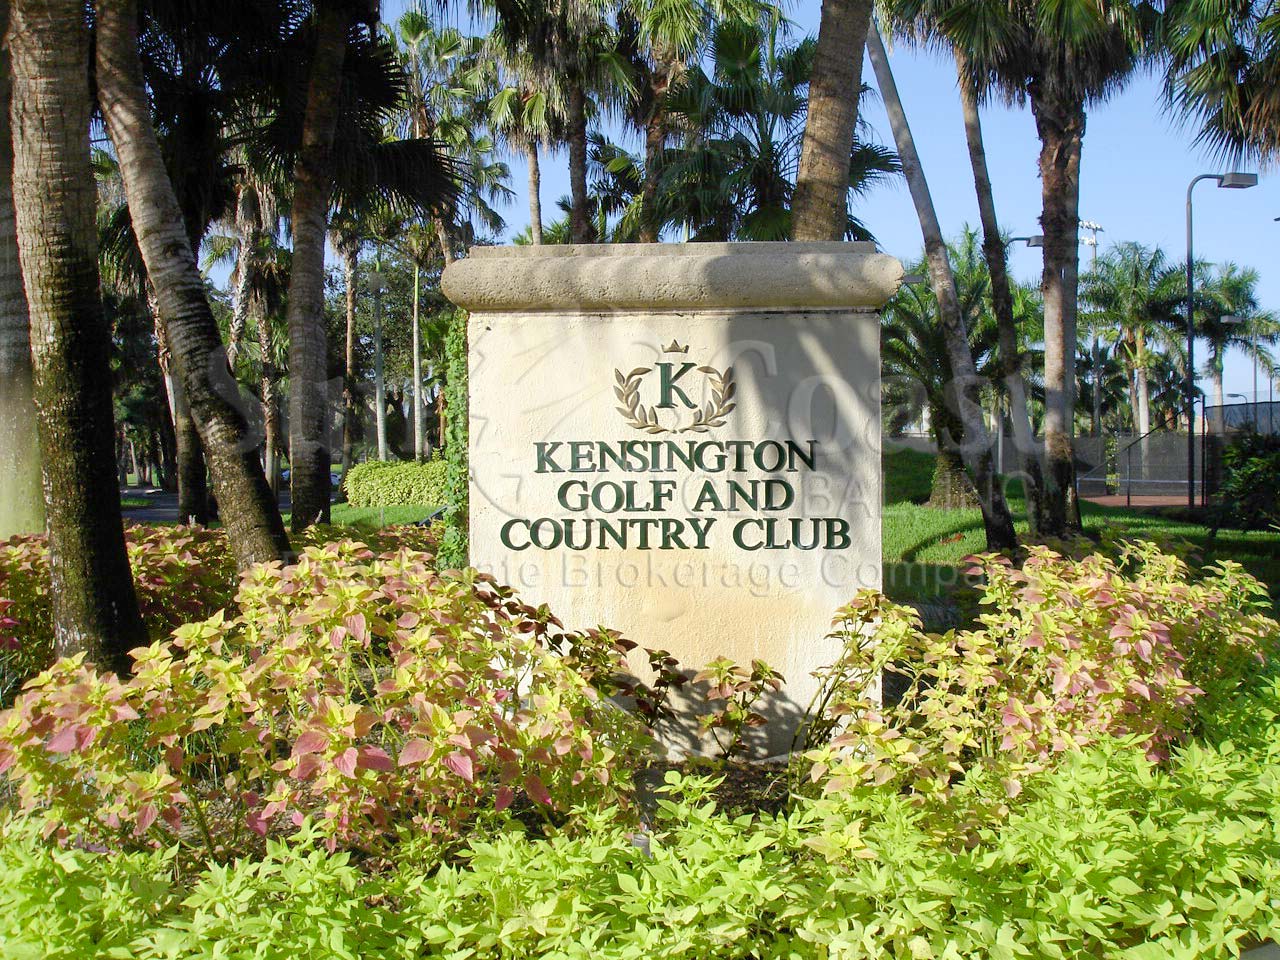 KENSINGTON Golf and Country Club sign